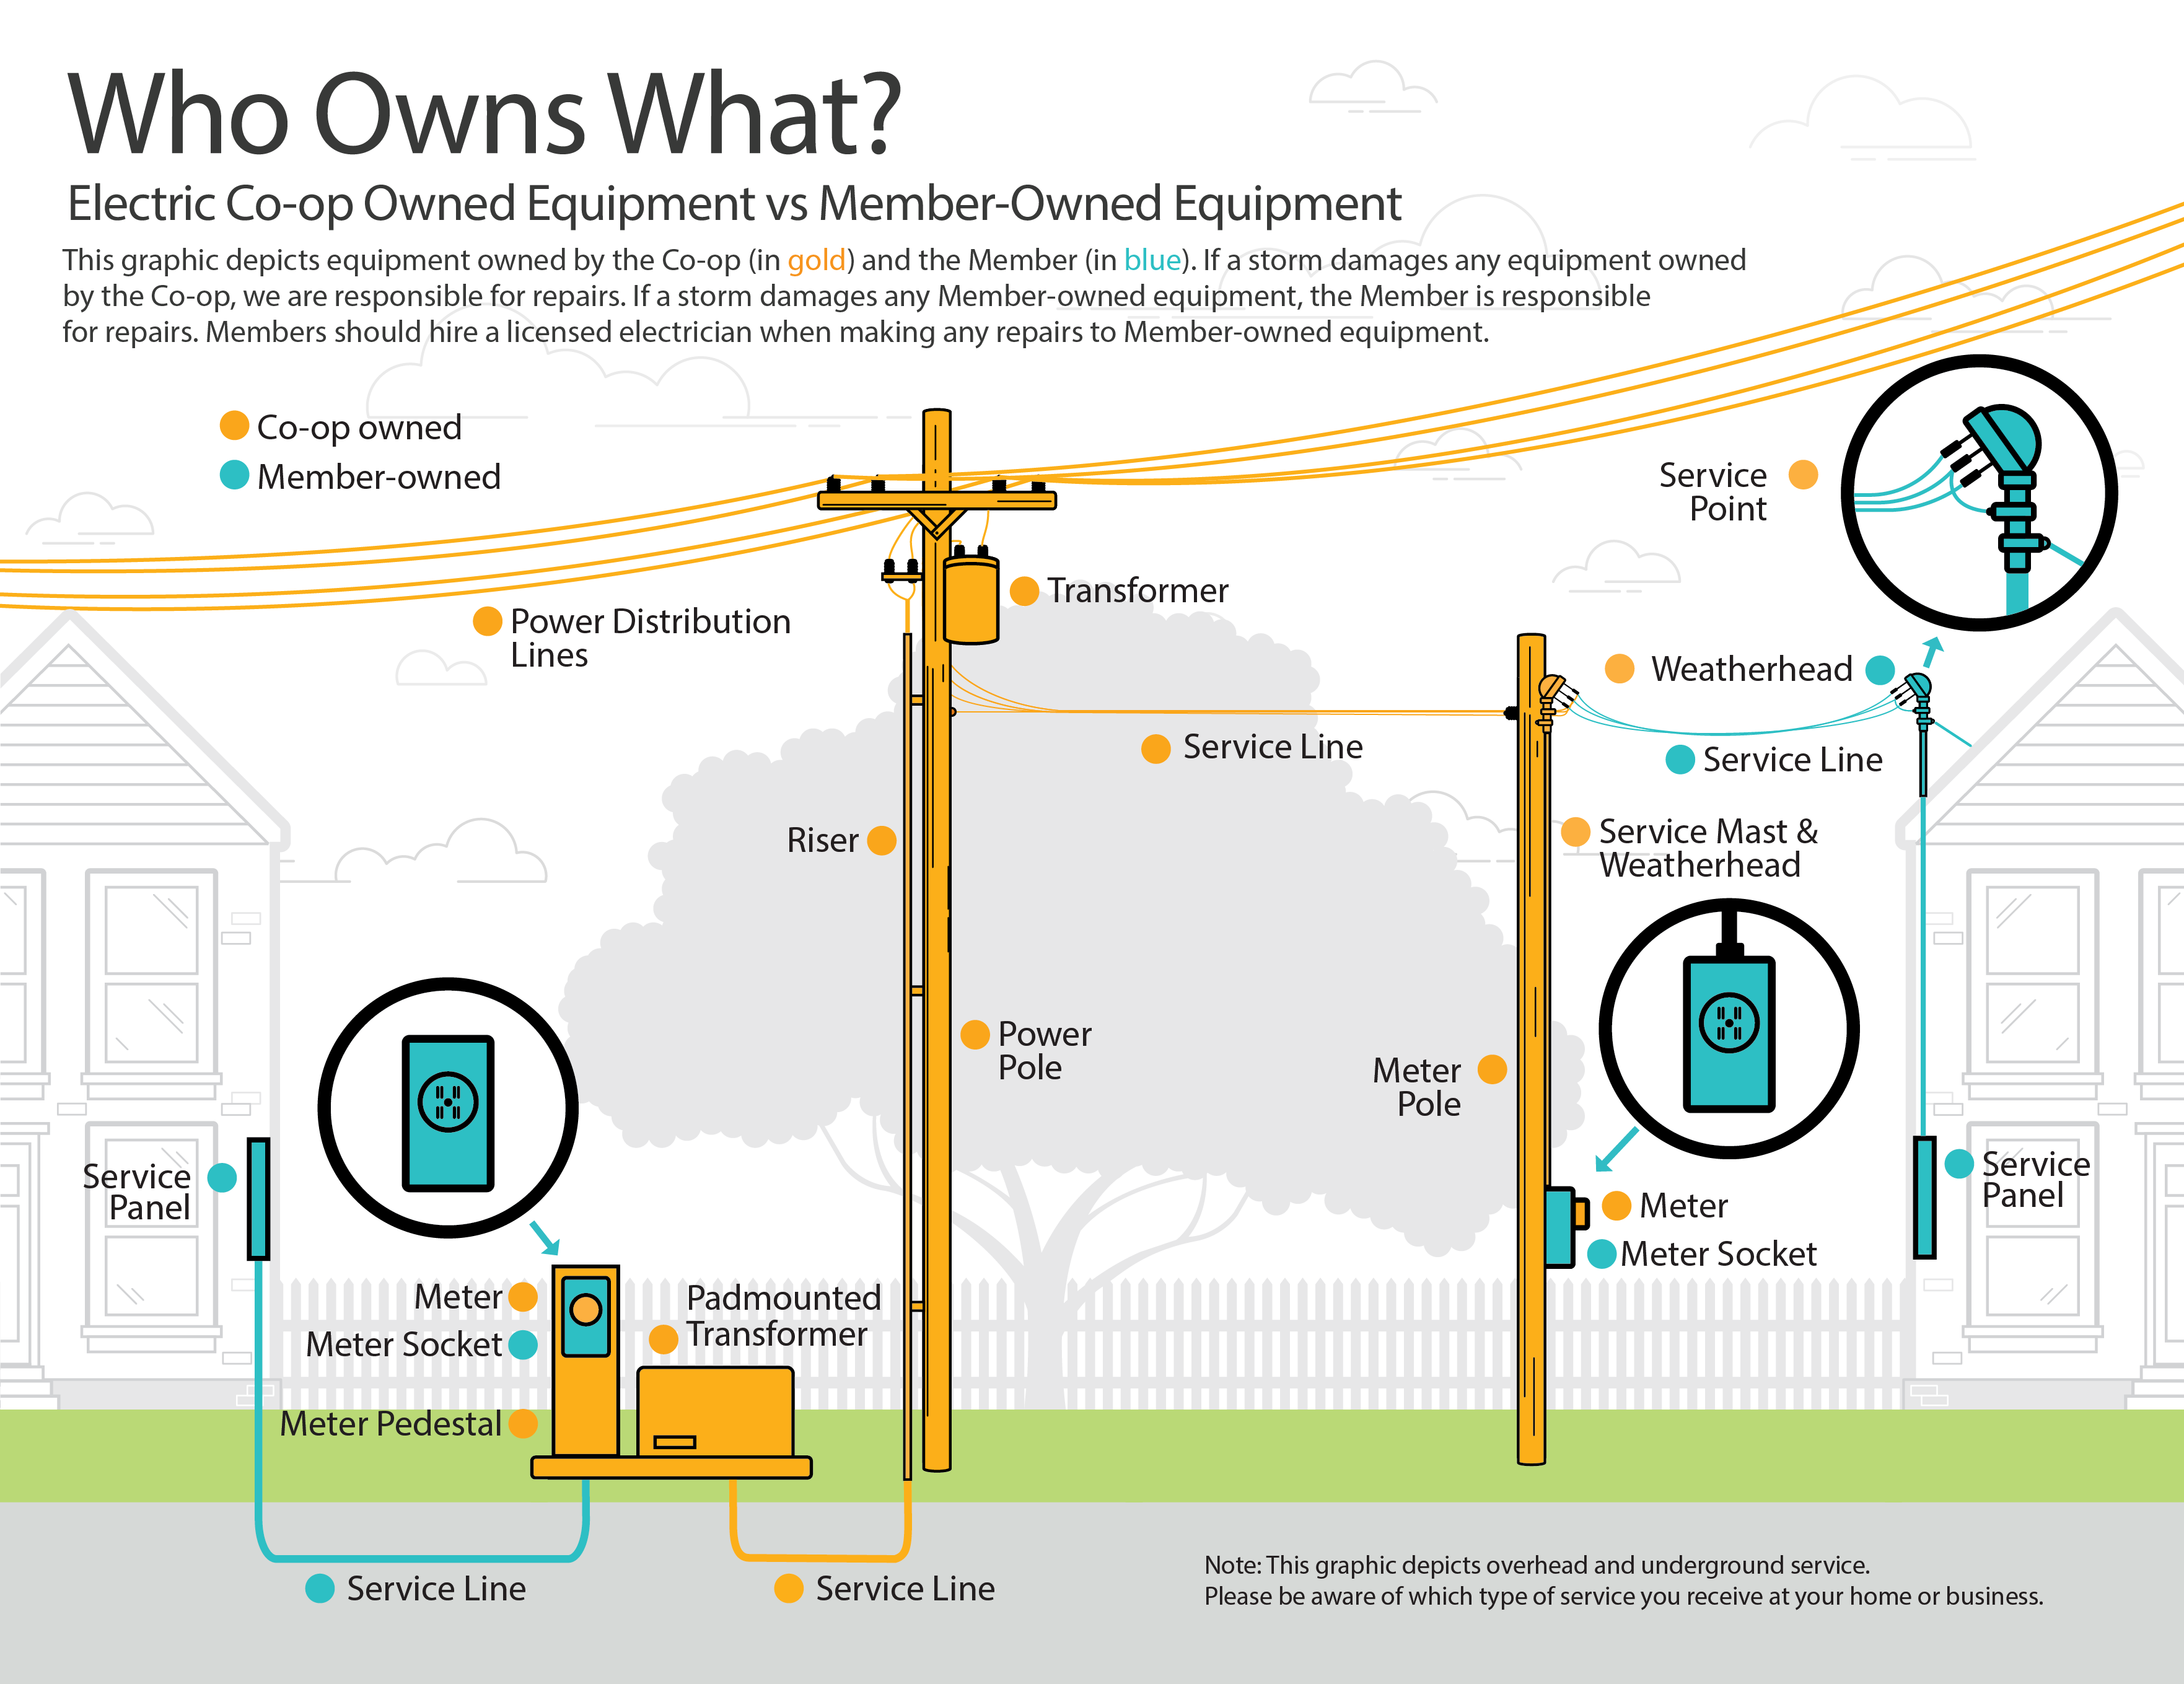 Who owns what electrical equipment graphic